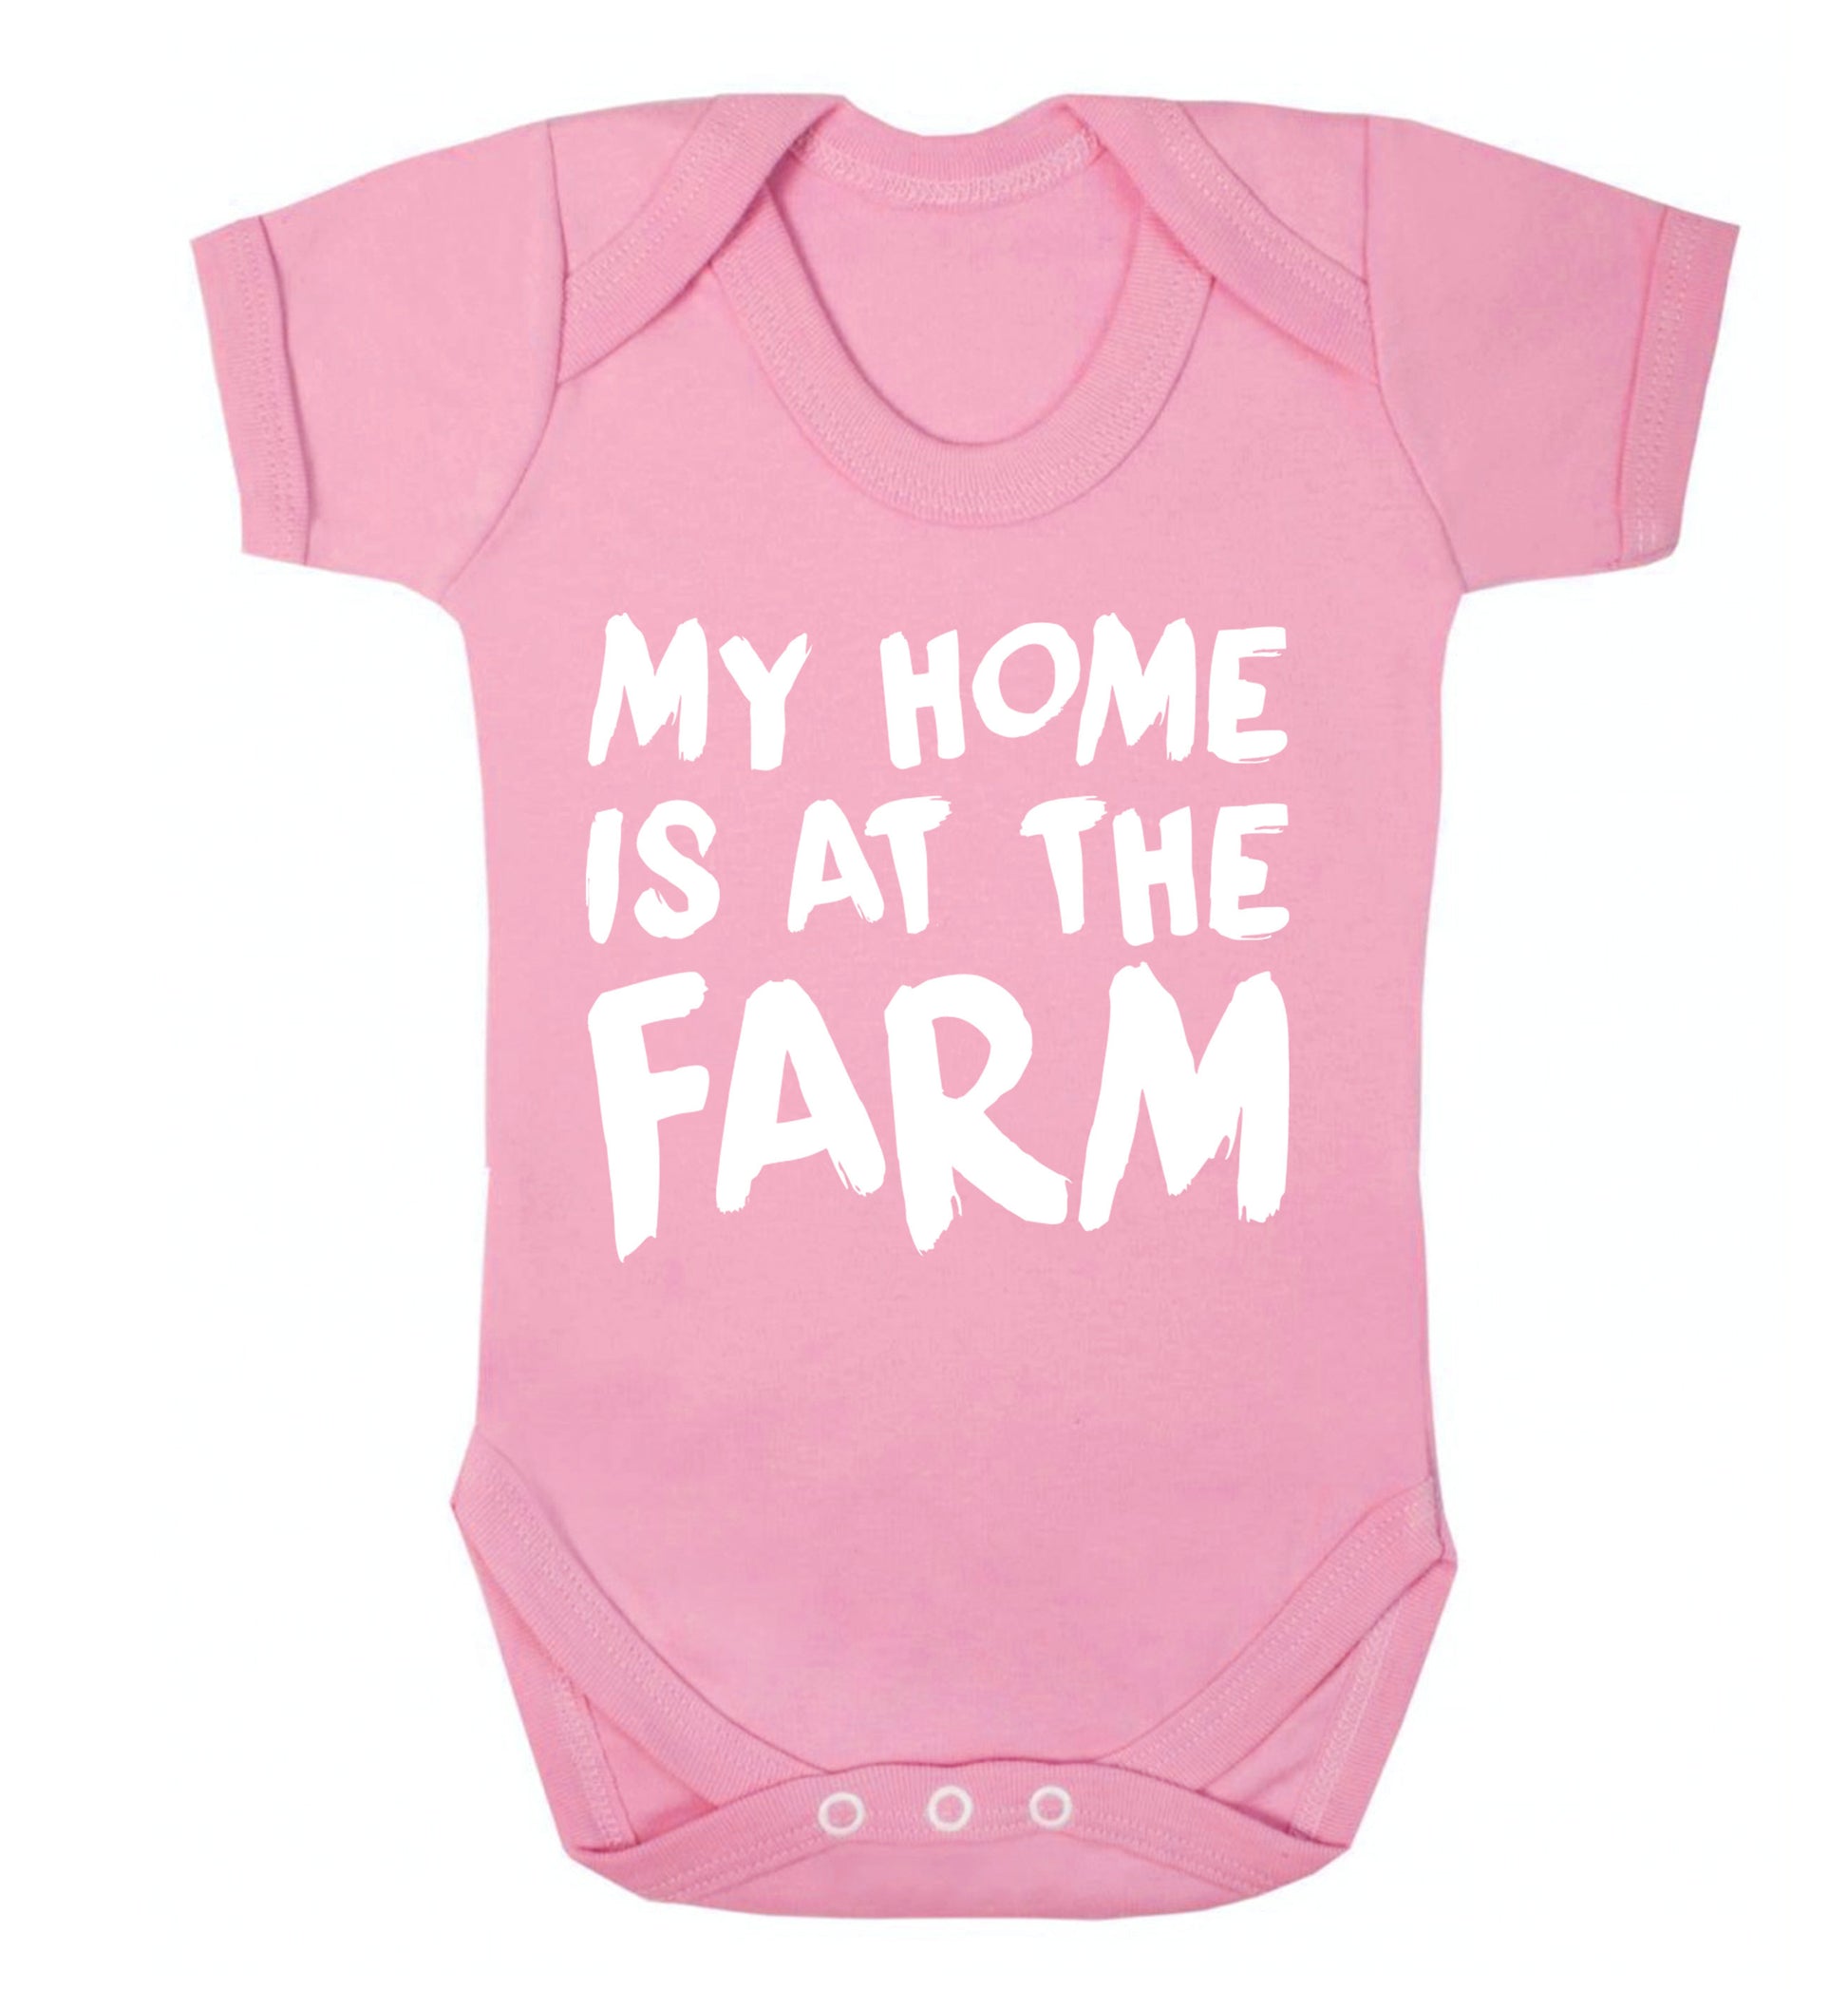 My home is at the farm Baby Vest pale pink 18-24 months